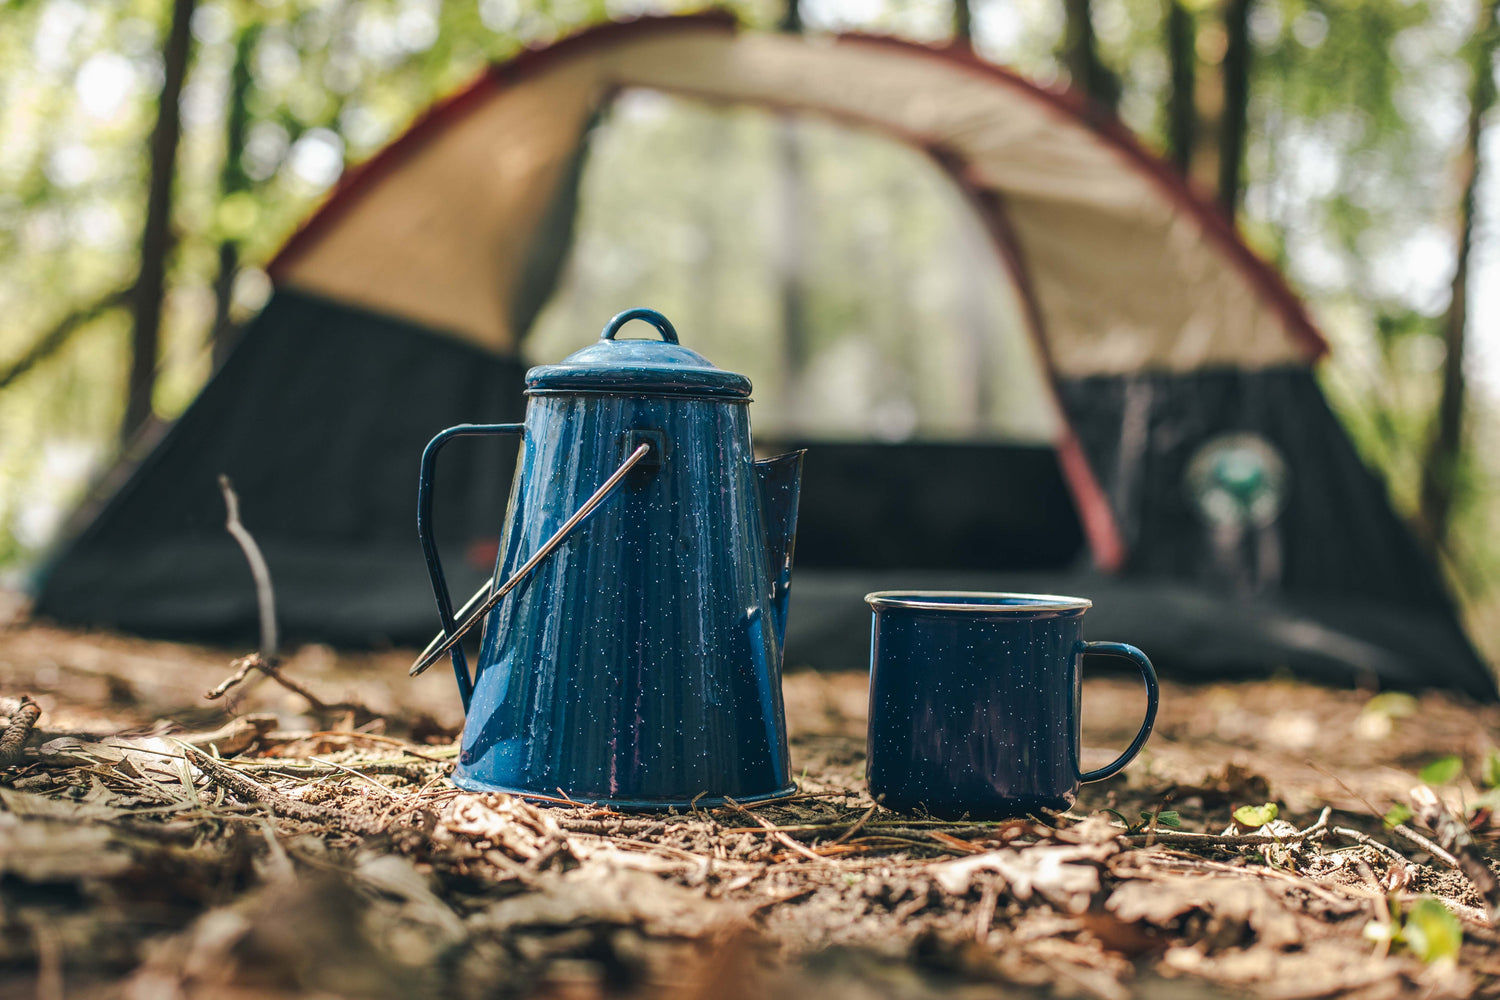 hianywhere homepage return policy banner tent and coffee cup